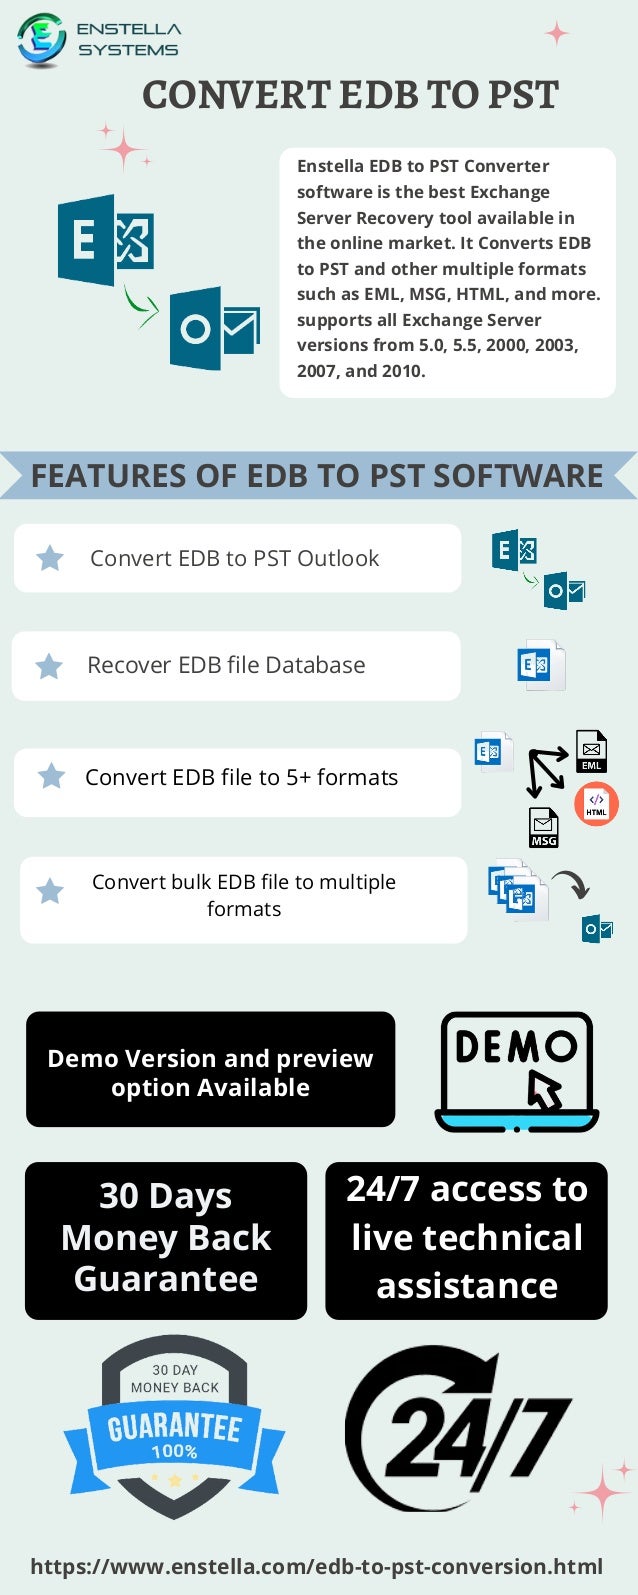 CONVERT EDB TO PST
Enstella EDB to PST Converter
software is the best Exchange
Server Recovery tool available in
the online market. It Converts EDB
to PST and other multiple formats
such as EML, MSG, HTML, and more.
supports all Exchange Server
versions from 5.0, 5.5, 2000, 2003,
2007, and 2010.
Convert EDB to PST Outlook
Recover EDB file Database
Demo Version and preview
option Available
24/7 access to
live technical
assistance
https://www.enstella.com/edb-to-pst-conversion.html
FEATURES OF EDB TO PST SOFTWARE
30 Days
Money Back
Guarantee
Convert EDB file to 5+ formats
Convert bulk EDB file to multiple
formats
.
 